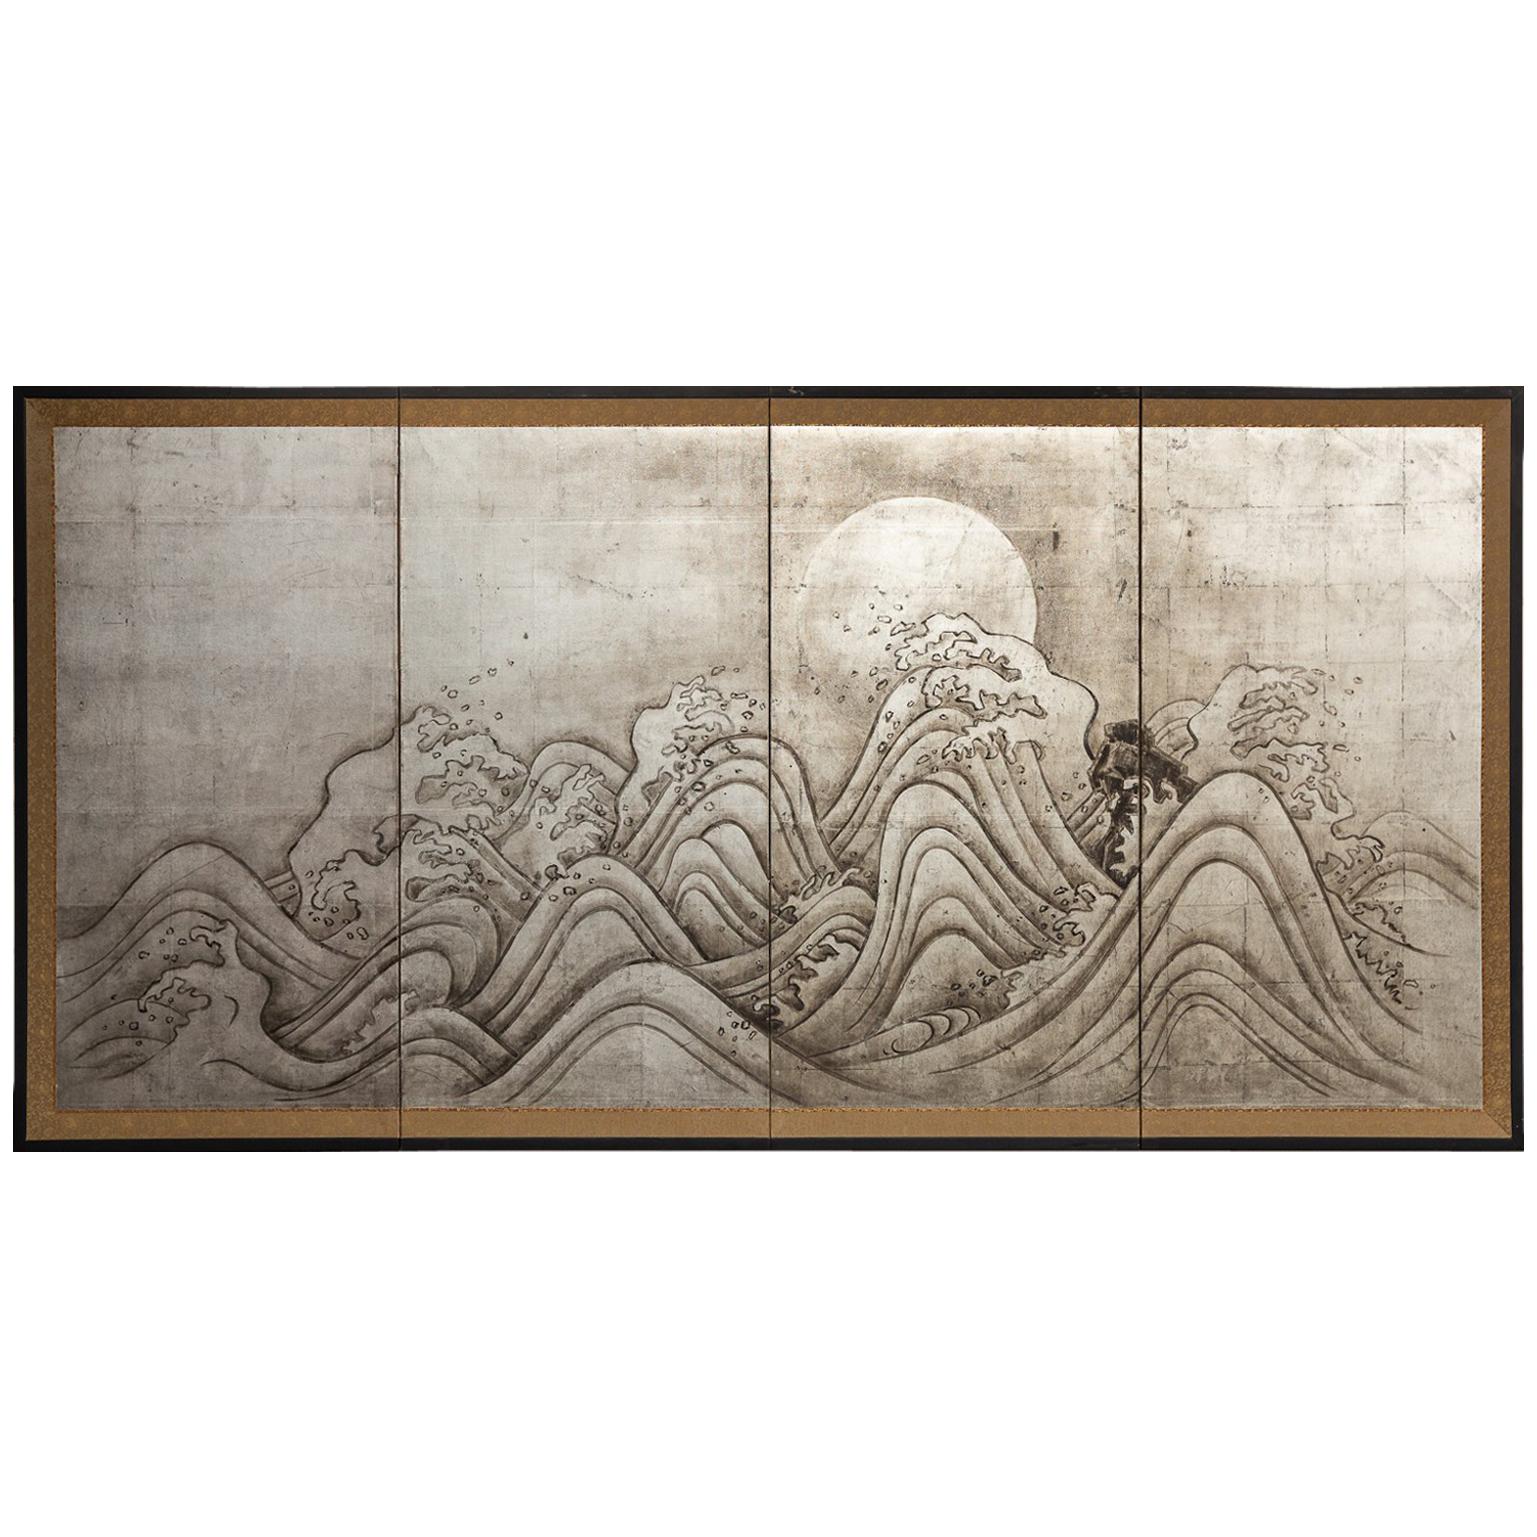 Japanese Four-Panel Screen, Moon and Ocean Landscape